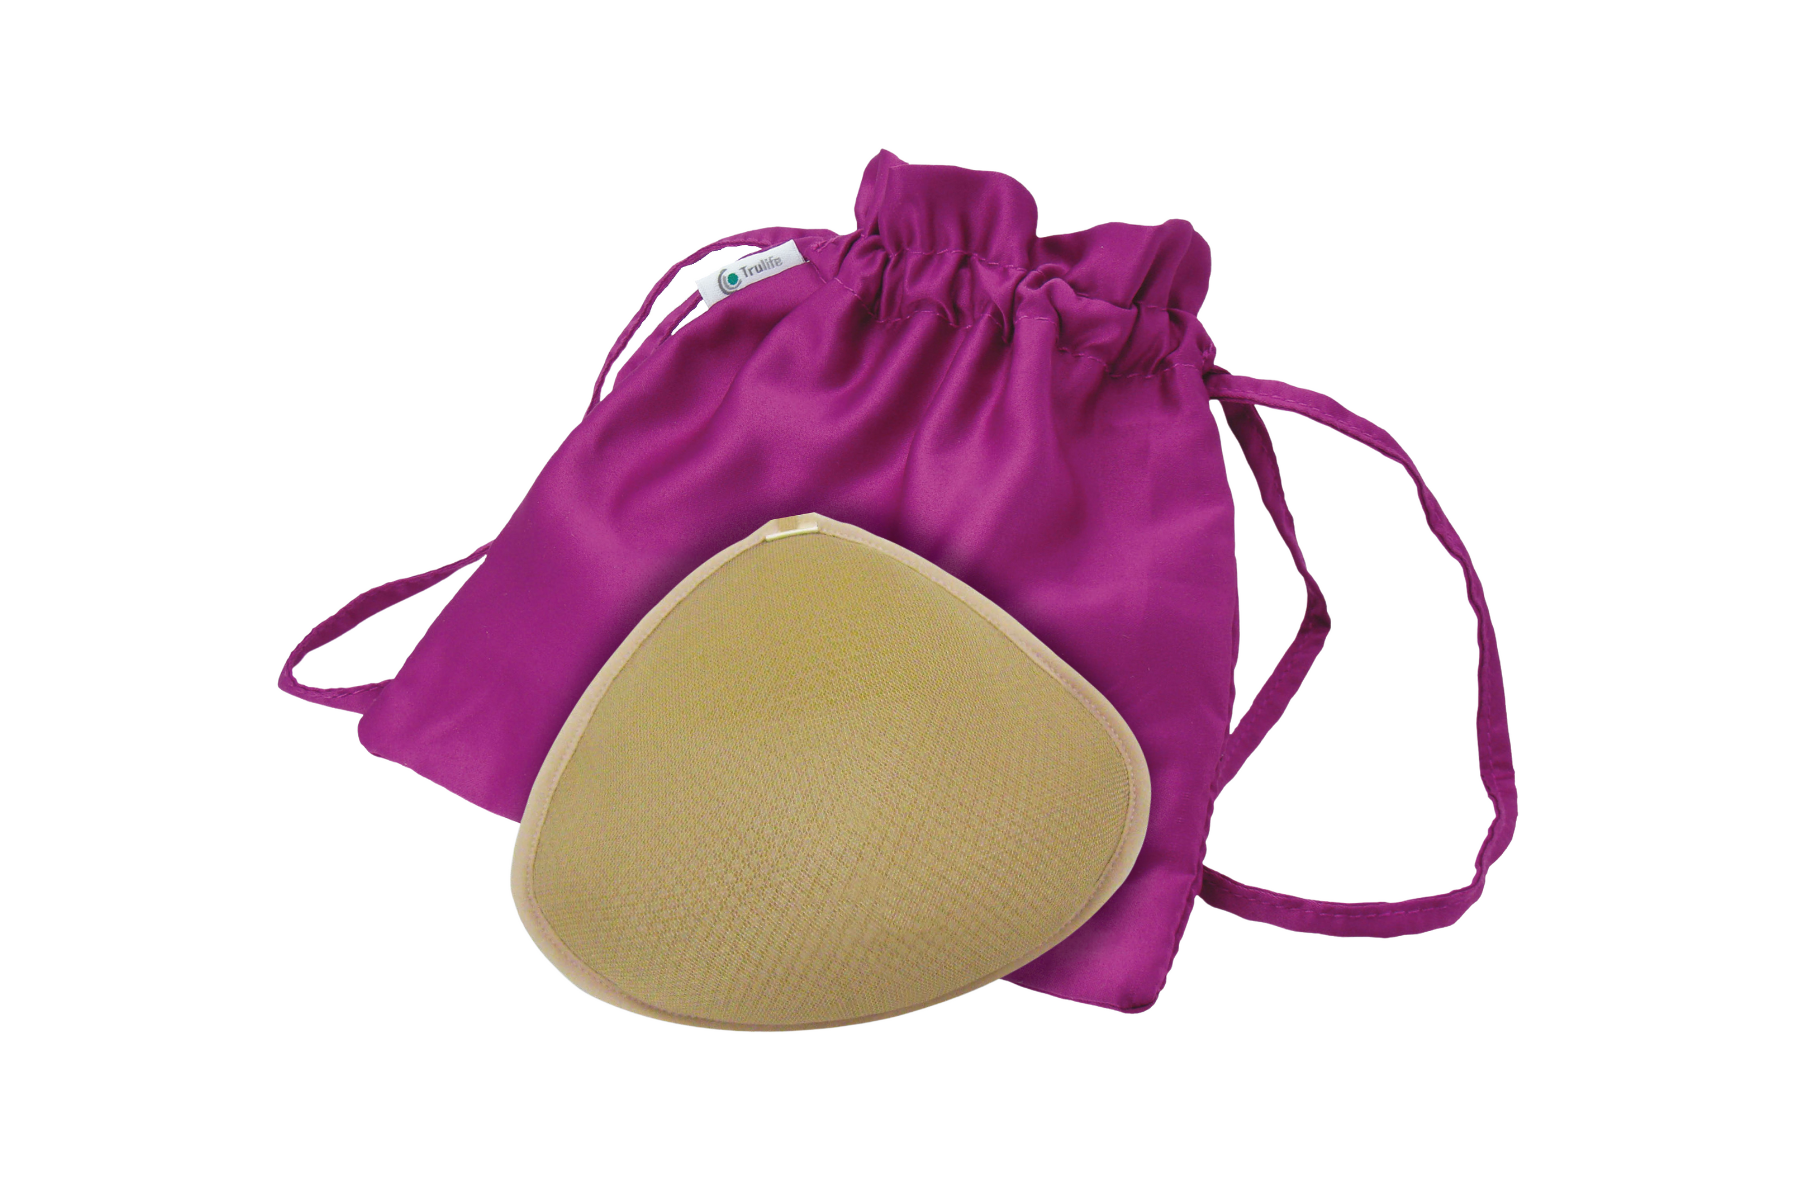 Trulife Mastectomy Bras - Breast Forms,Mastectomy Swimming Breast Forms